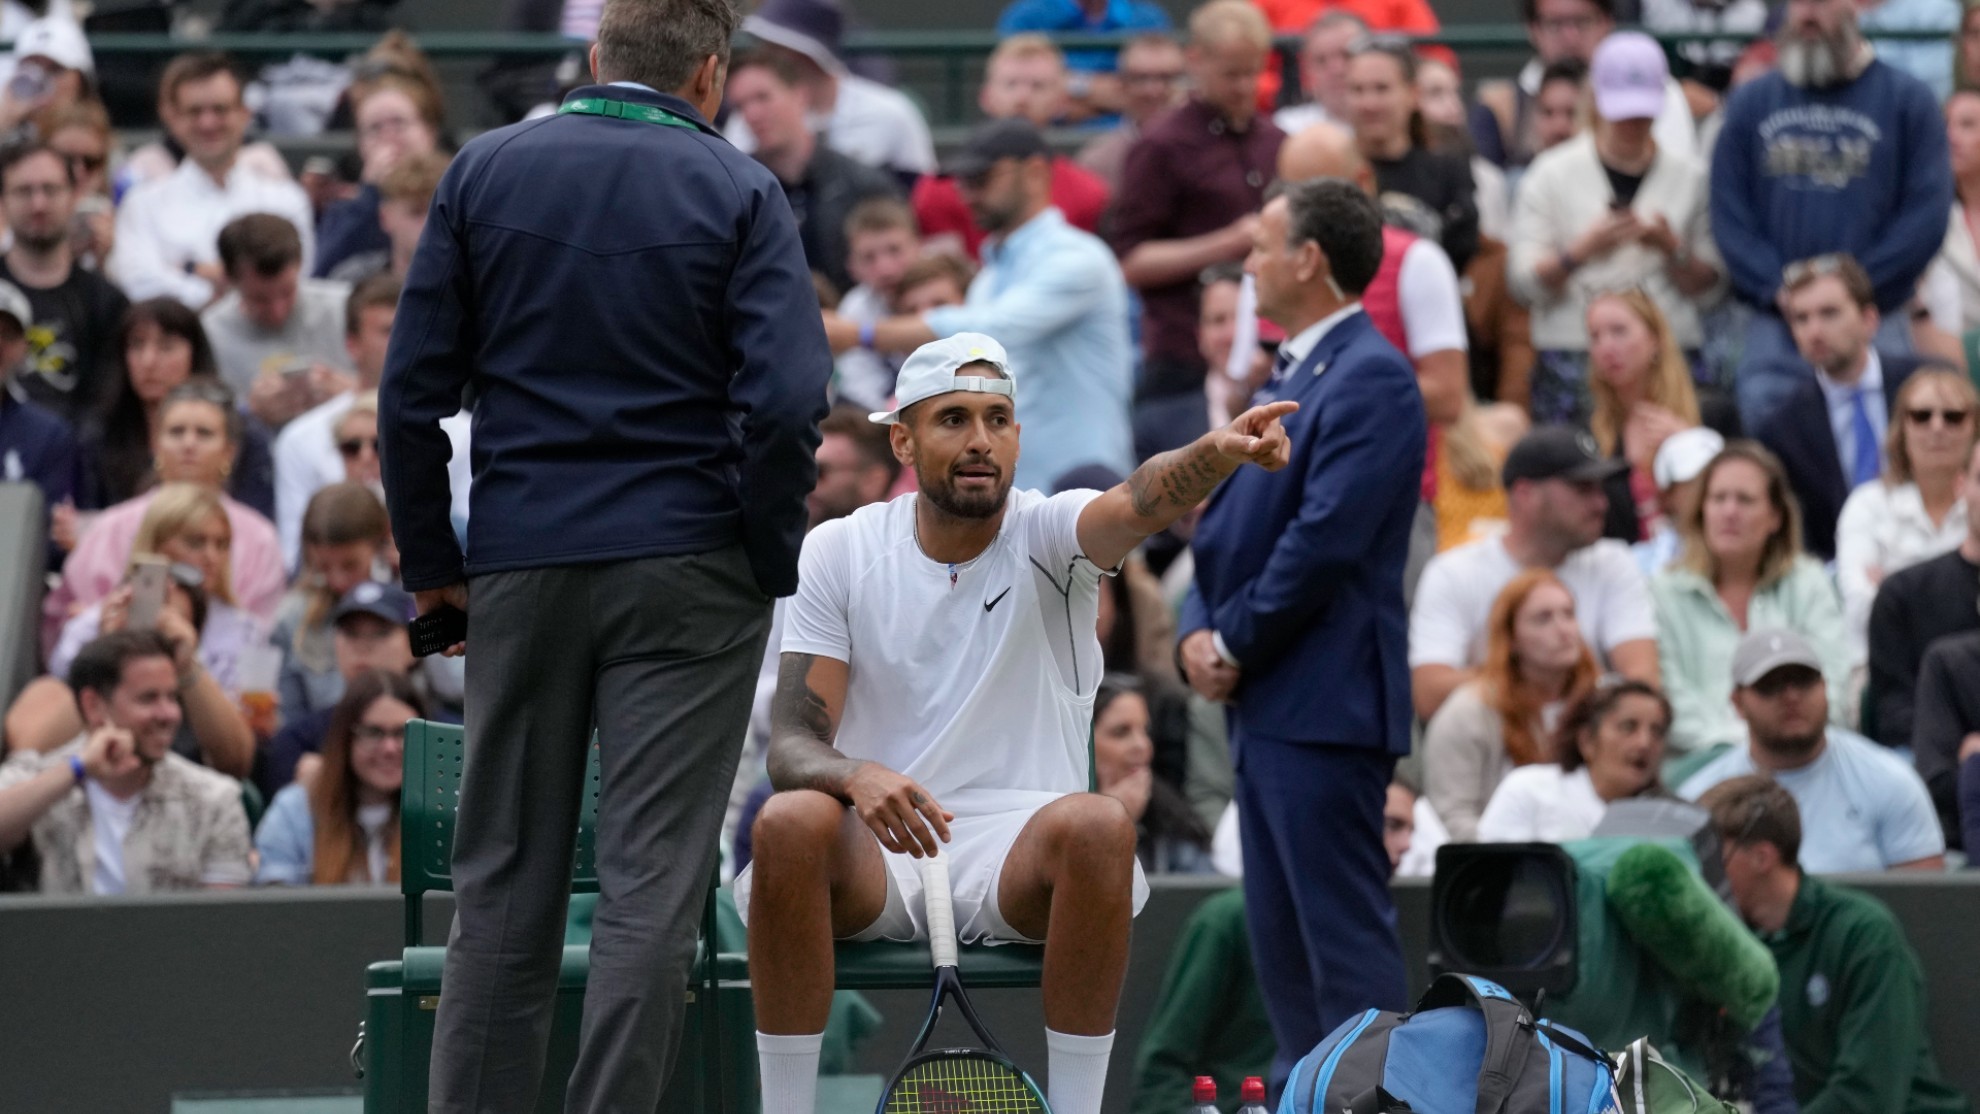 Nick Kyrgios talks to an official during a third round men's singles match against Greece's Stefanos Tsitsipas.